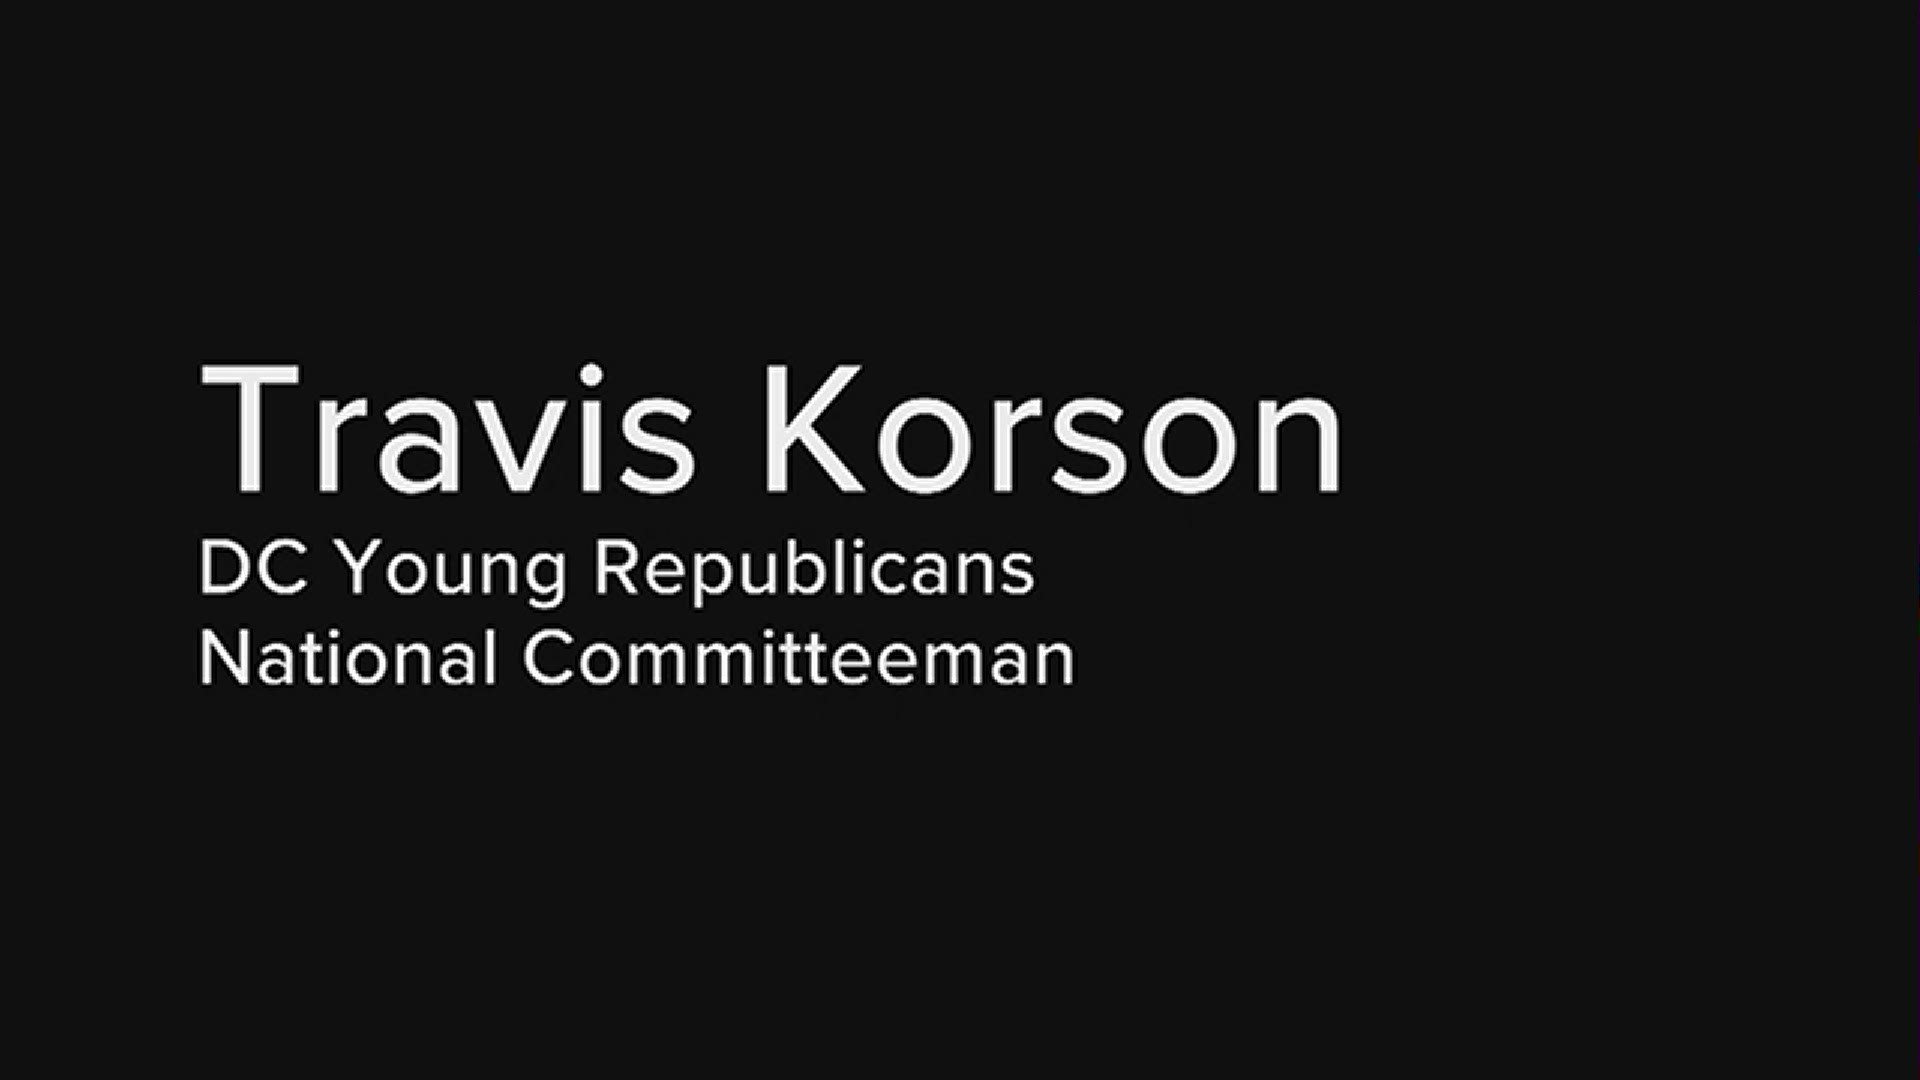 DC Young Republicans National Committeeman Travis Korson discusses the GOP's efforts to bring out the youth vote in November.